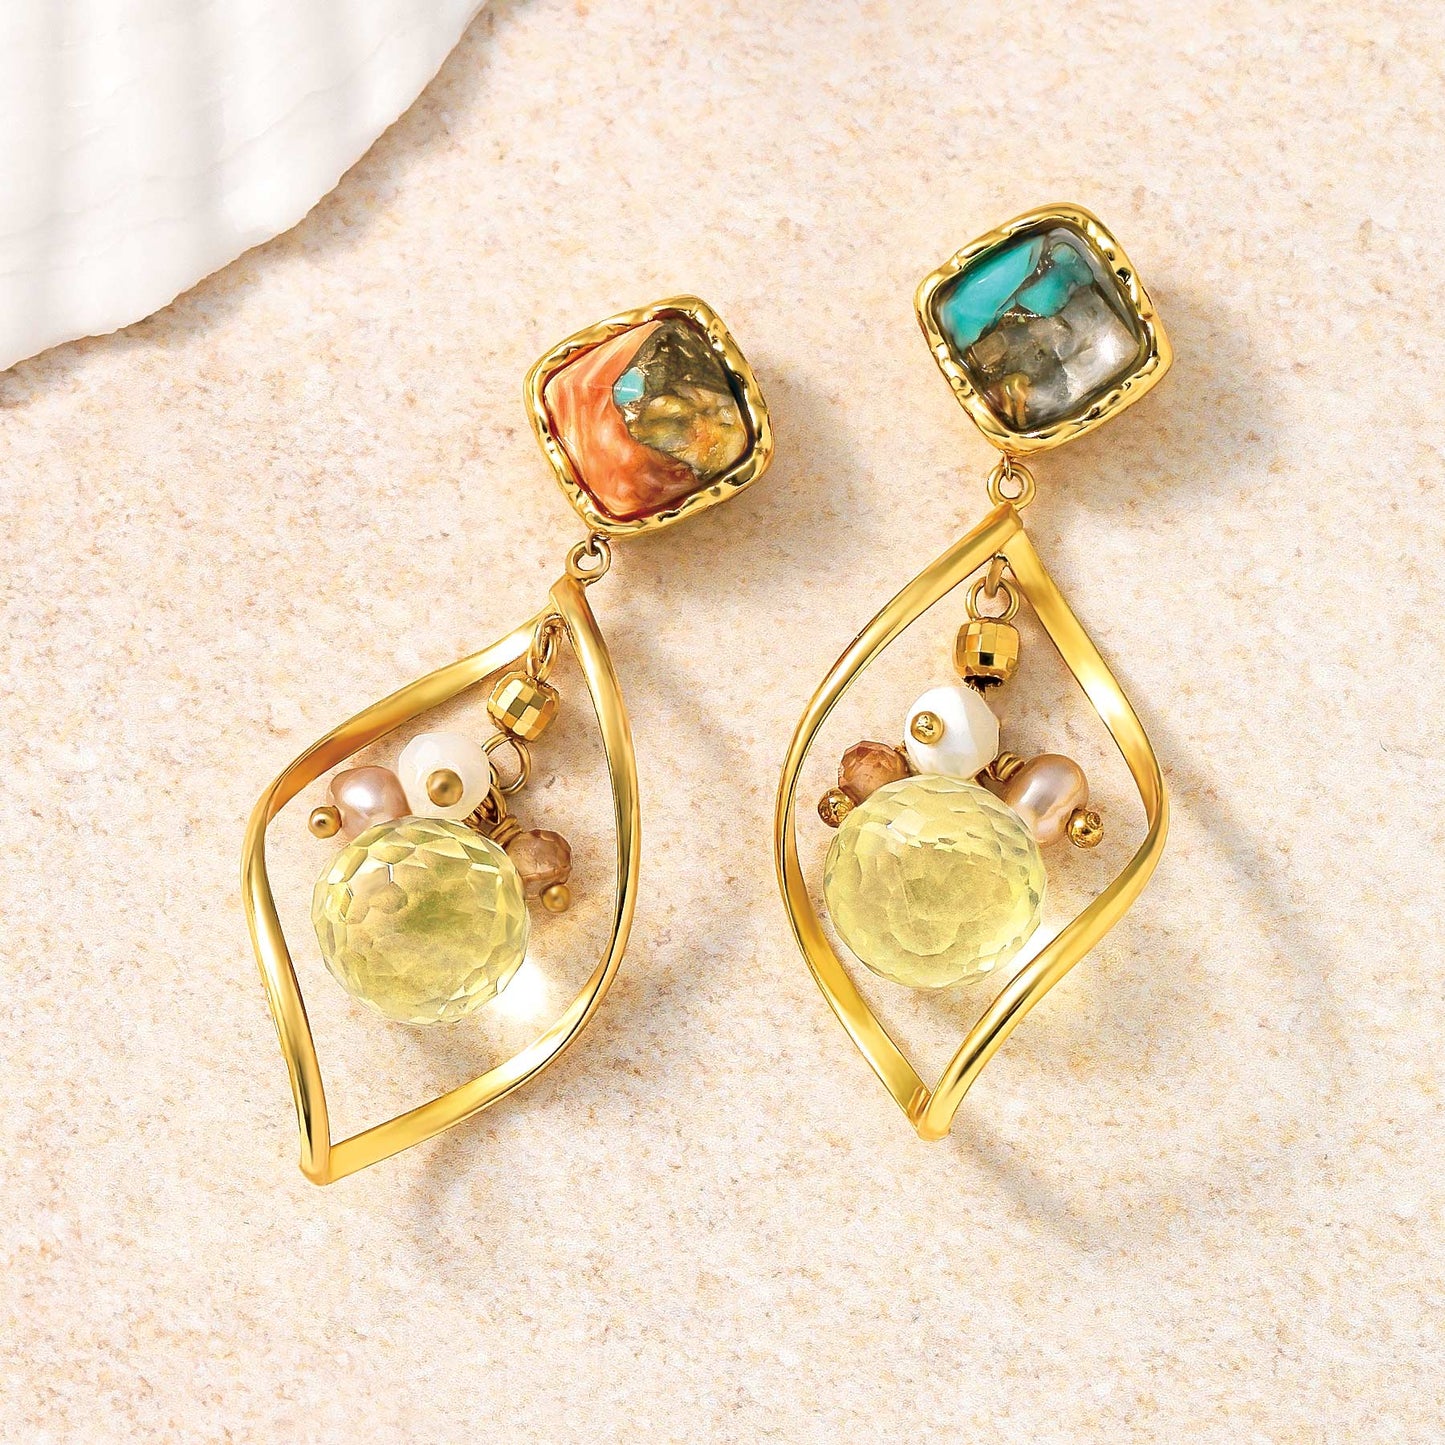 18K / 925 Sterling Silver Oyster Copper Turquoise Earrings - Product Image